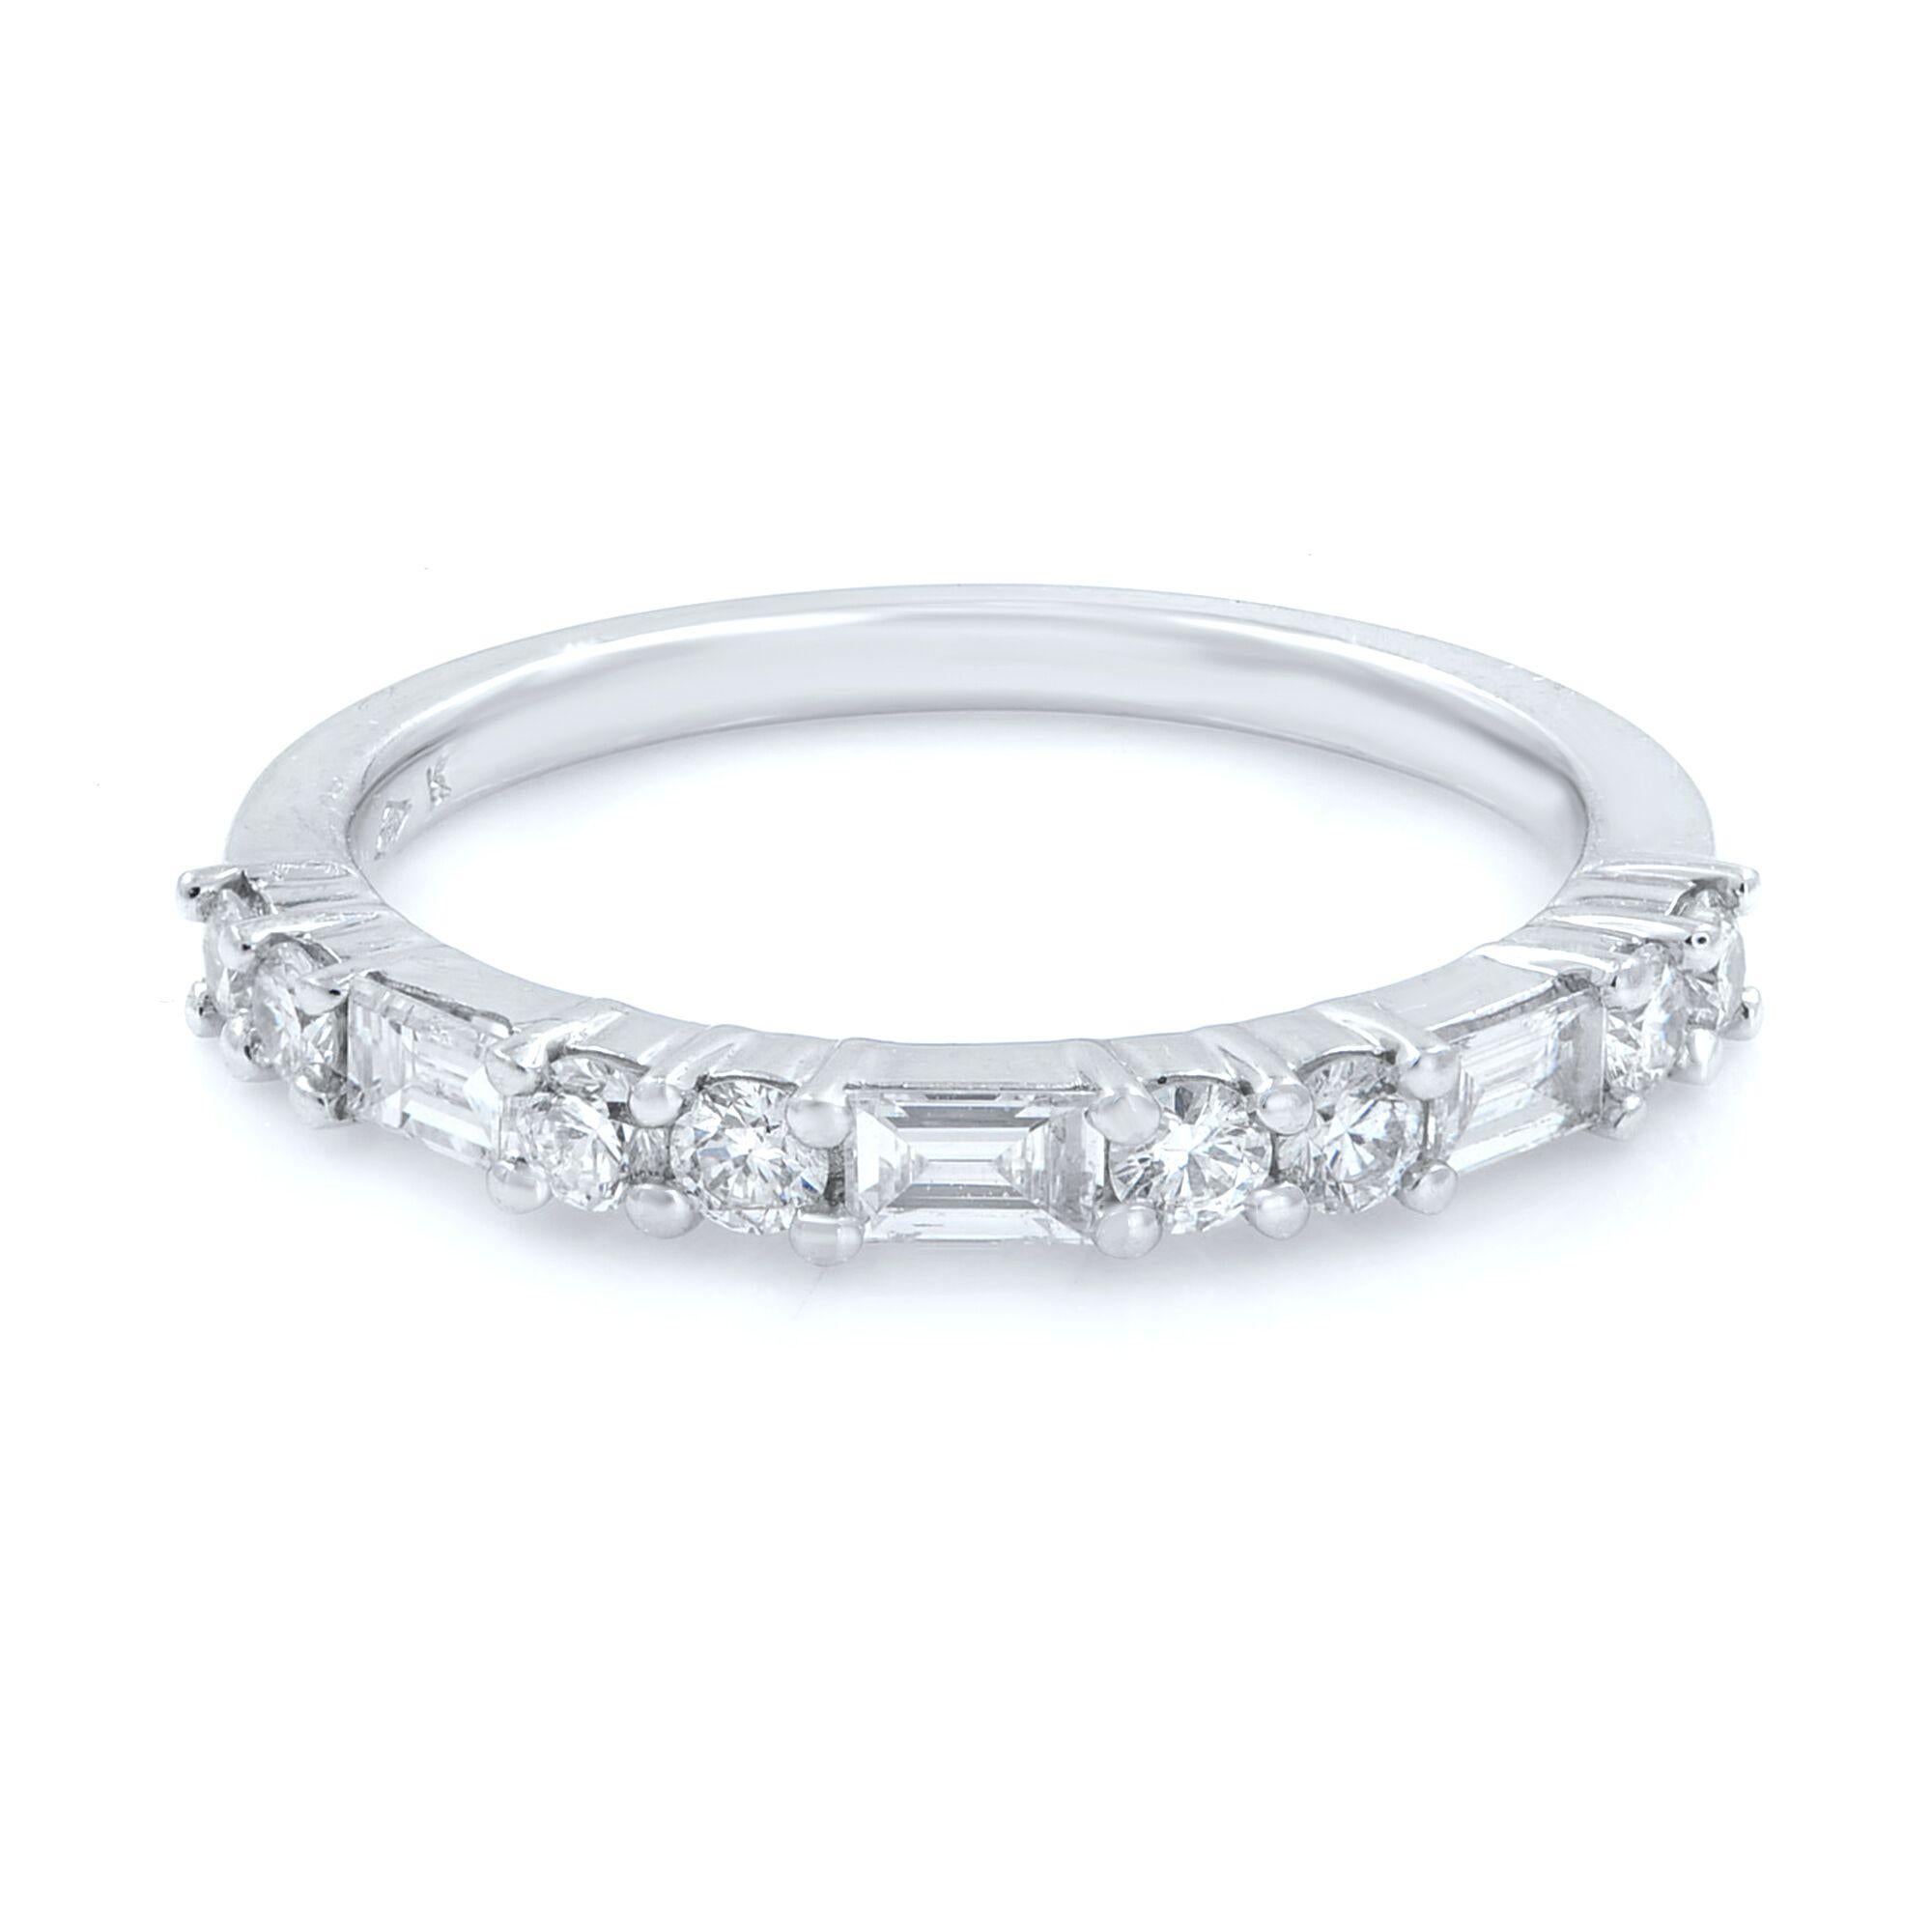 Alternating sections of two round brilliant cut diamonds and one baguette cut diamond continuing half way around in a 18 karat white gold prong setting wedding band. 
Carat weight: 0.58cts
Size: 7